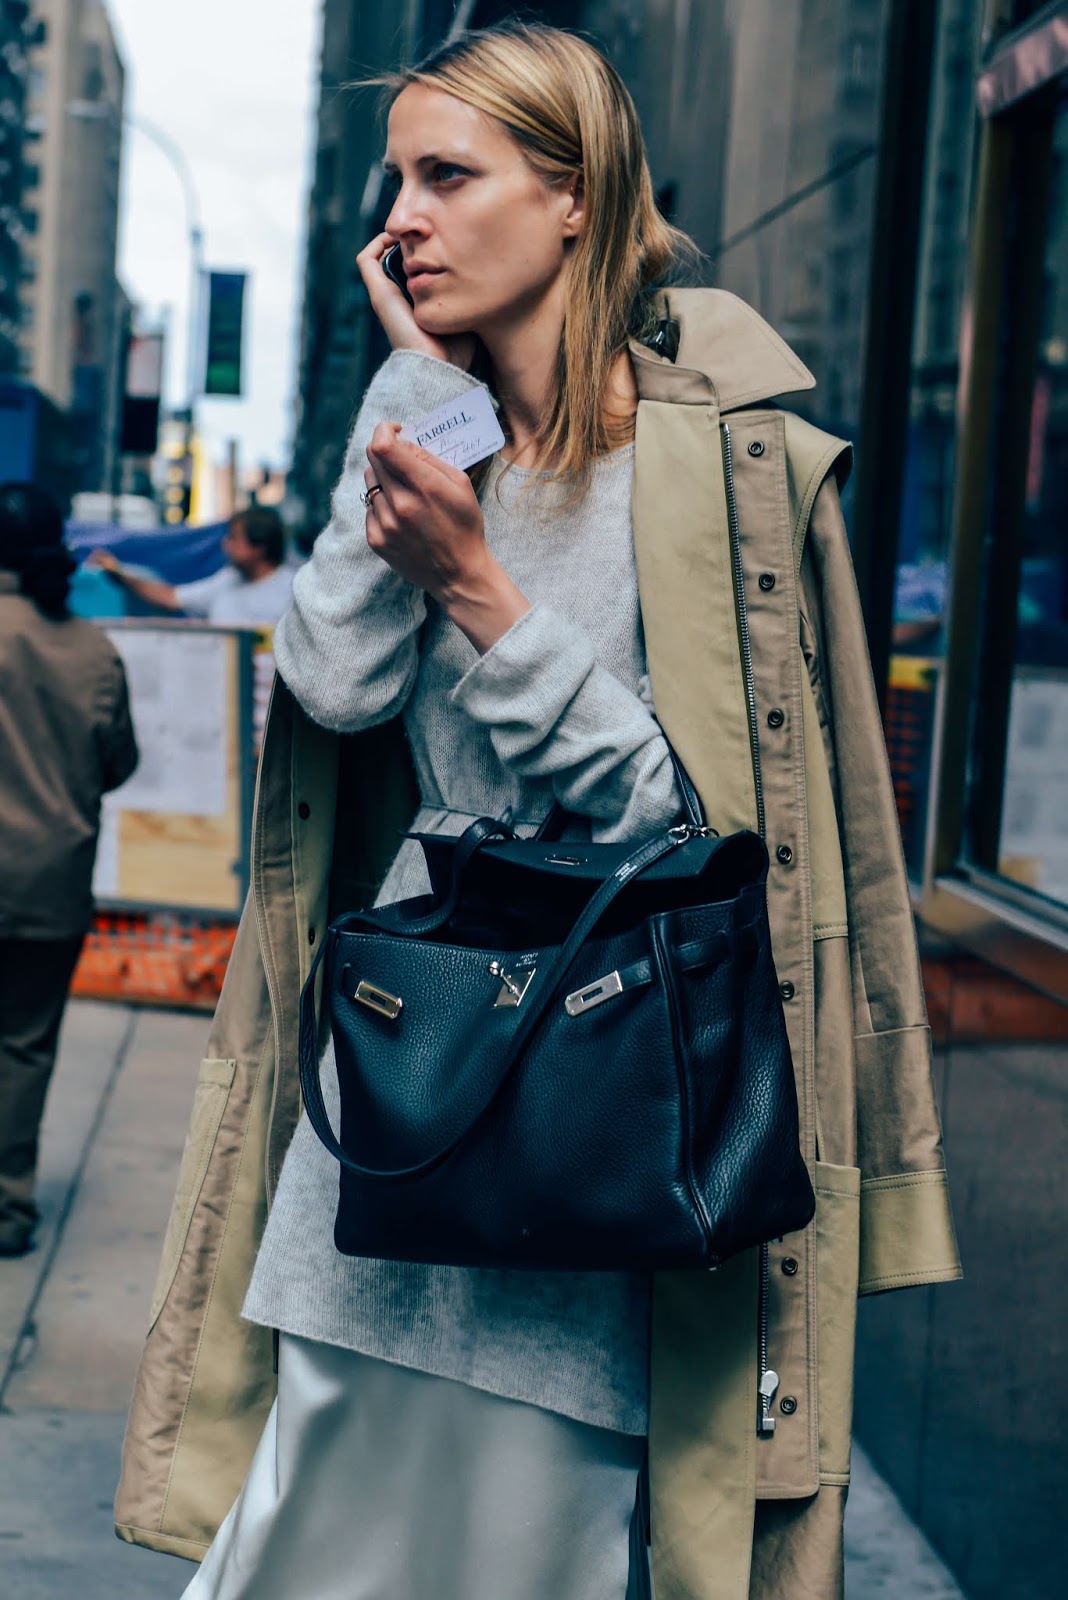 An Incredibly Chic Way to Wear Layers for Fall